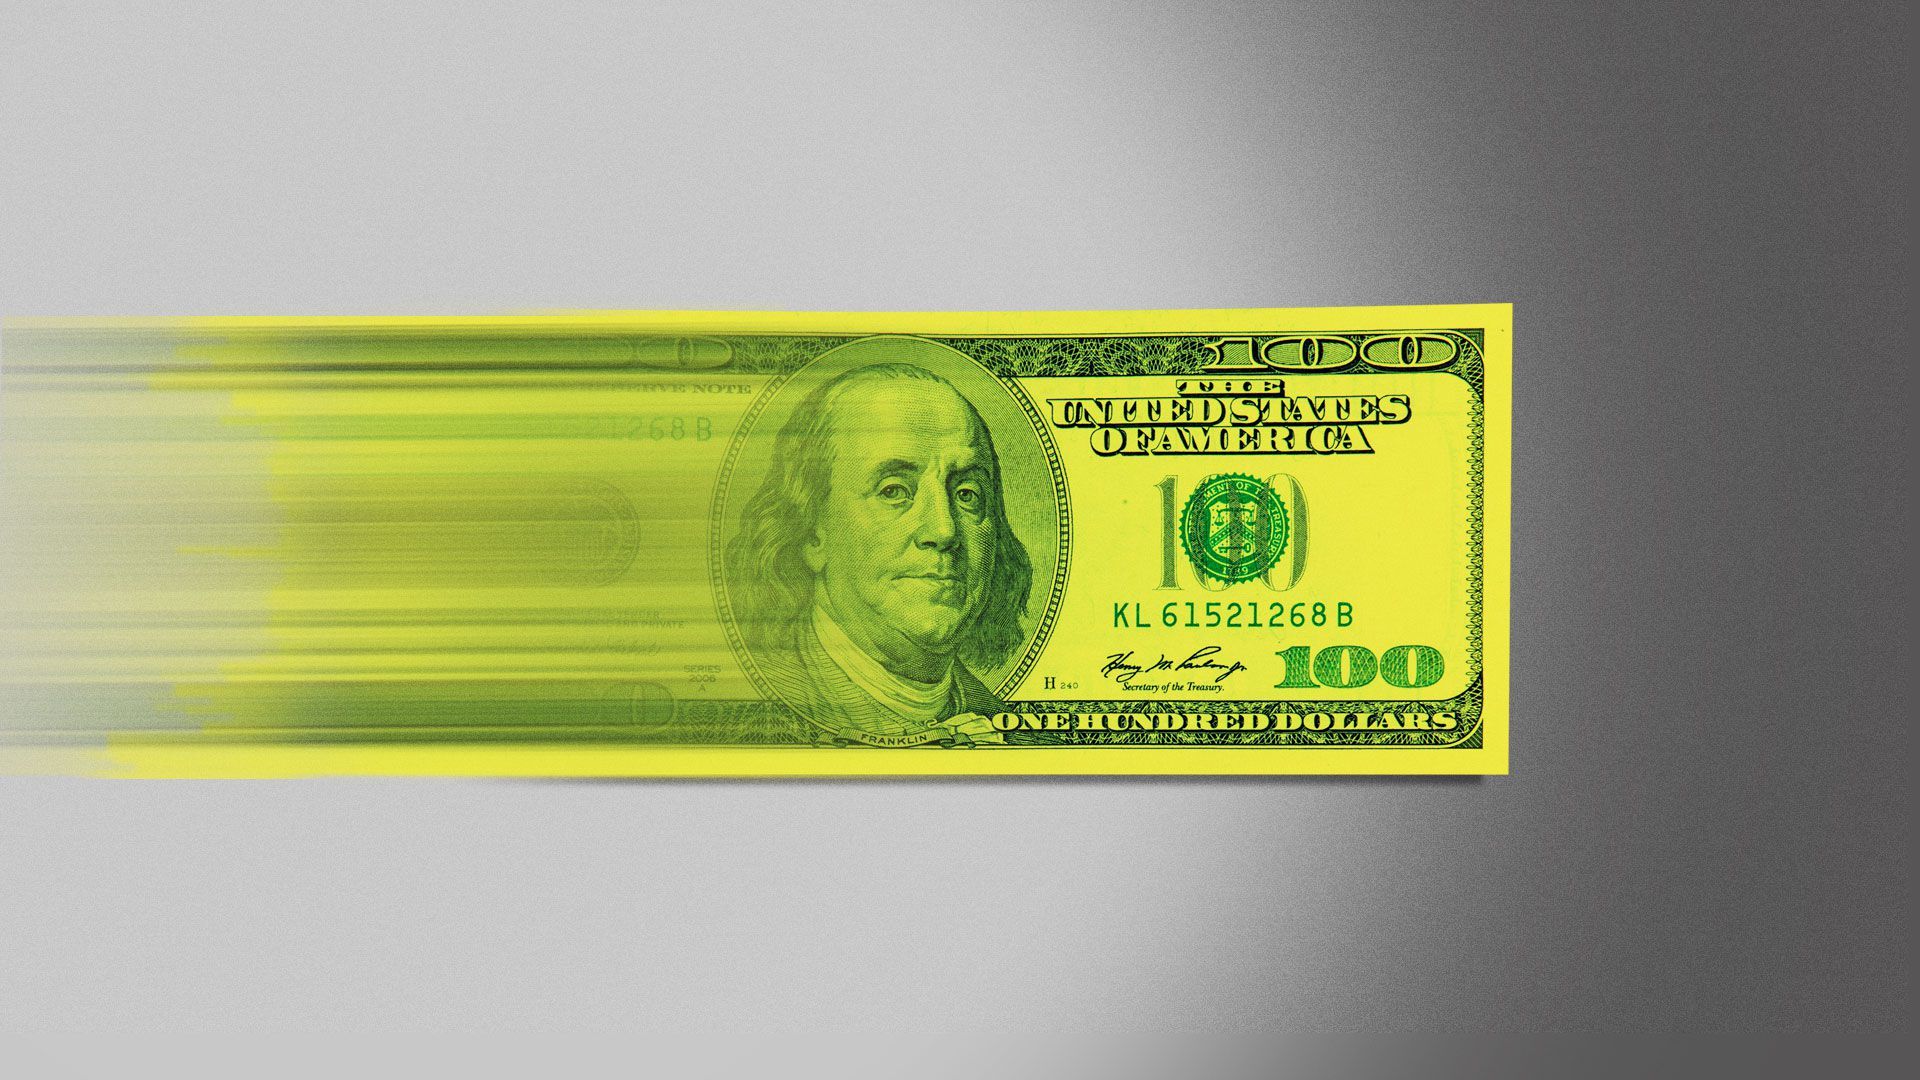 Illustration of a $100 bill accelerating to warp speed